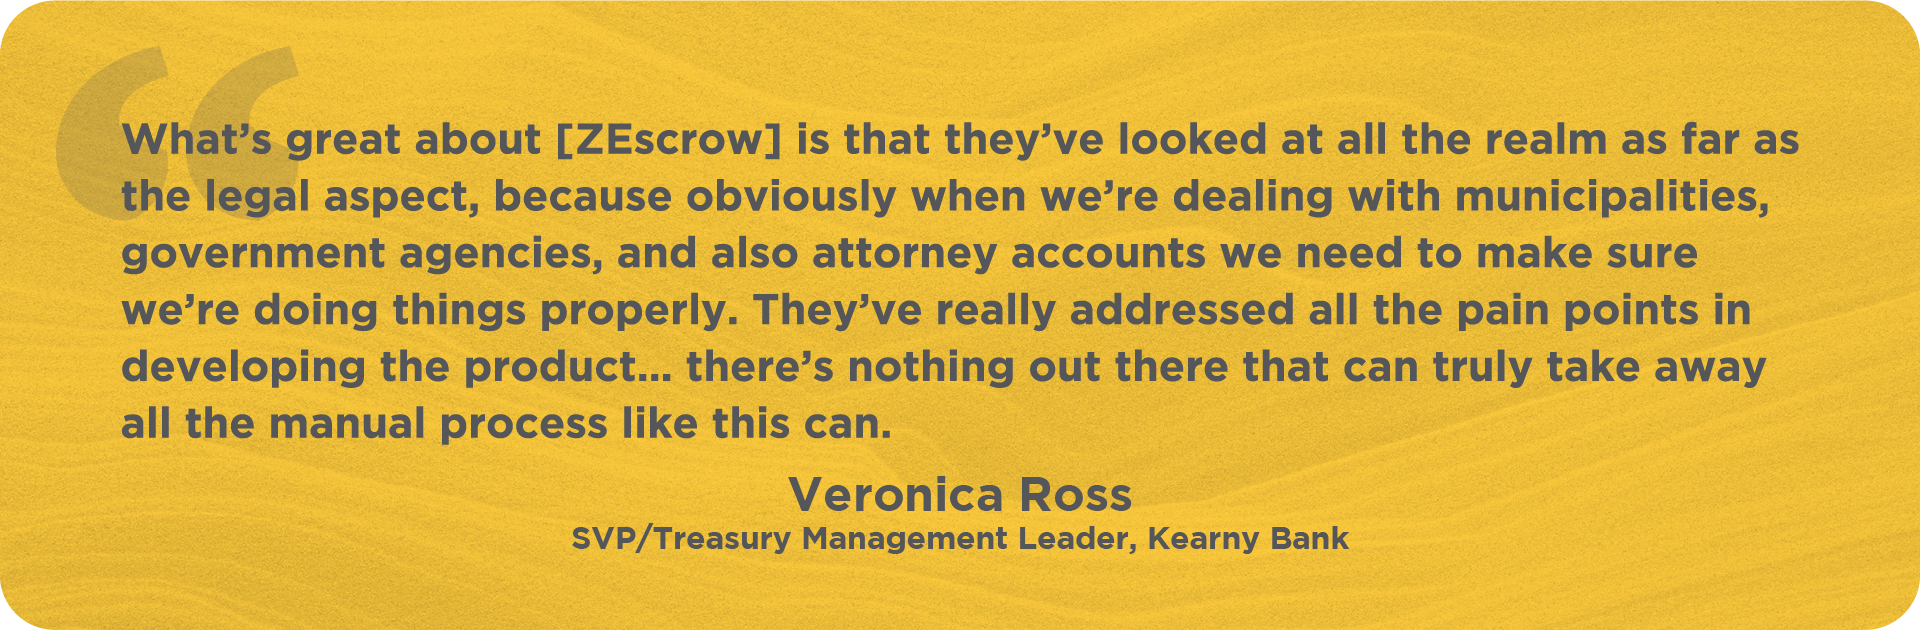 Quote from SVP/Treasury Managment Leader about ZEscrow being legally compliant and taking away the manual process